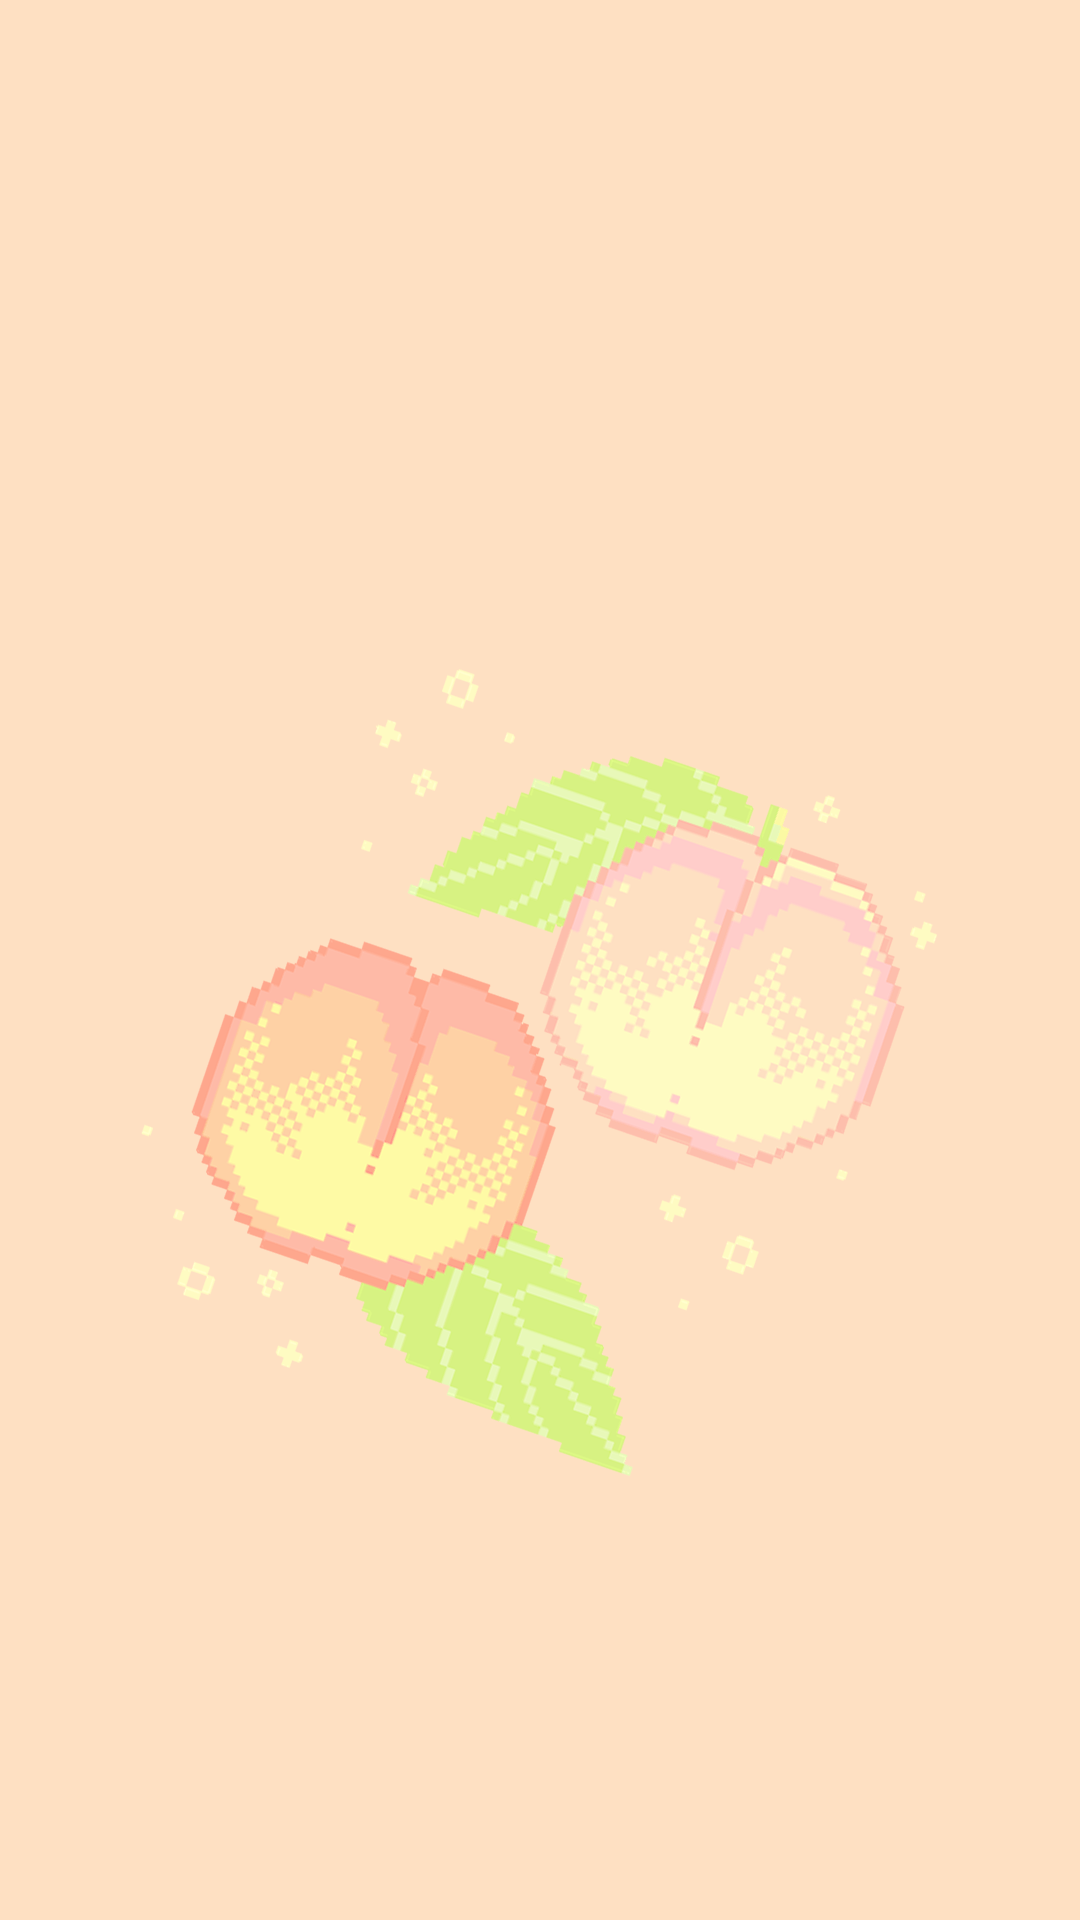 A pixelated image of two peaches with leaves on a light orange background. - Peach